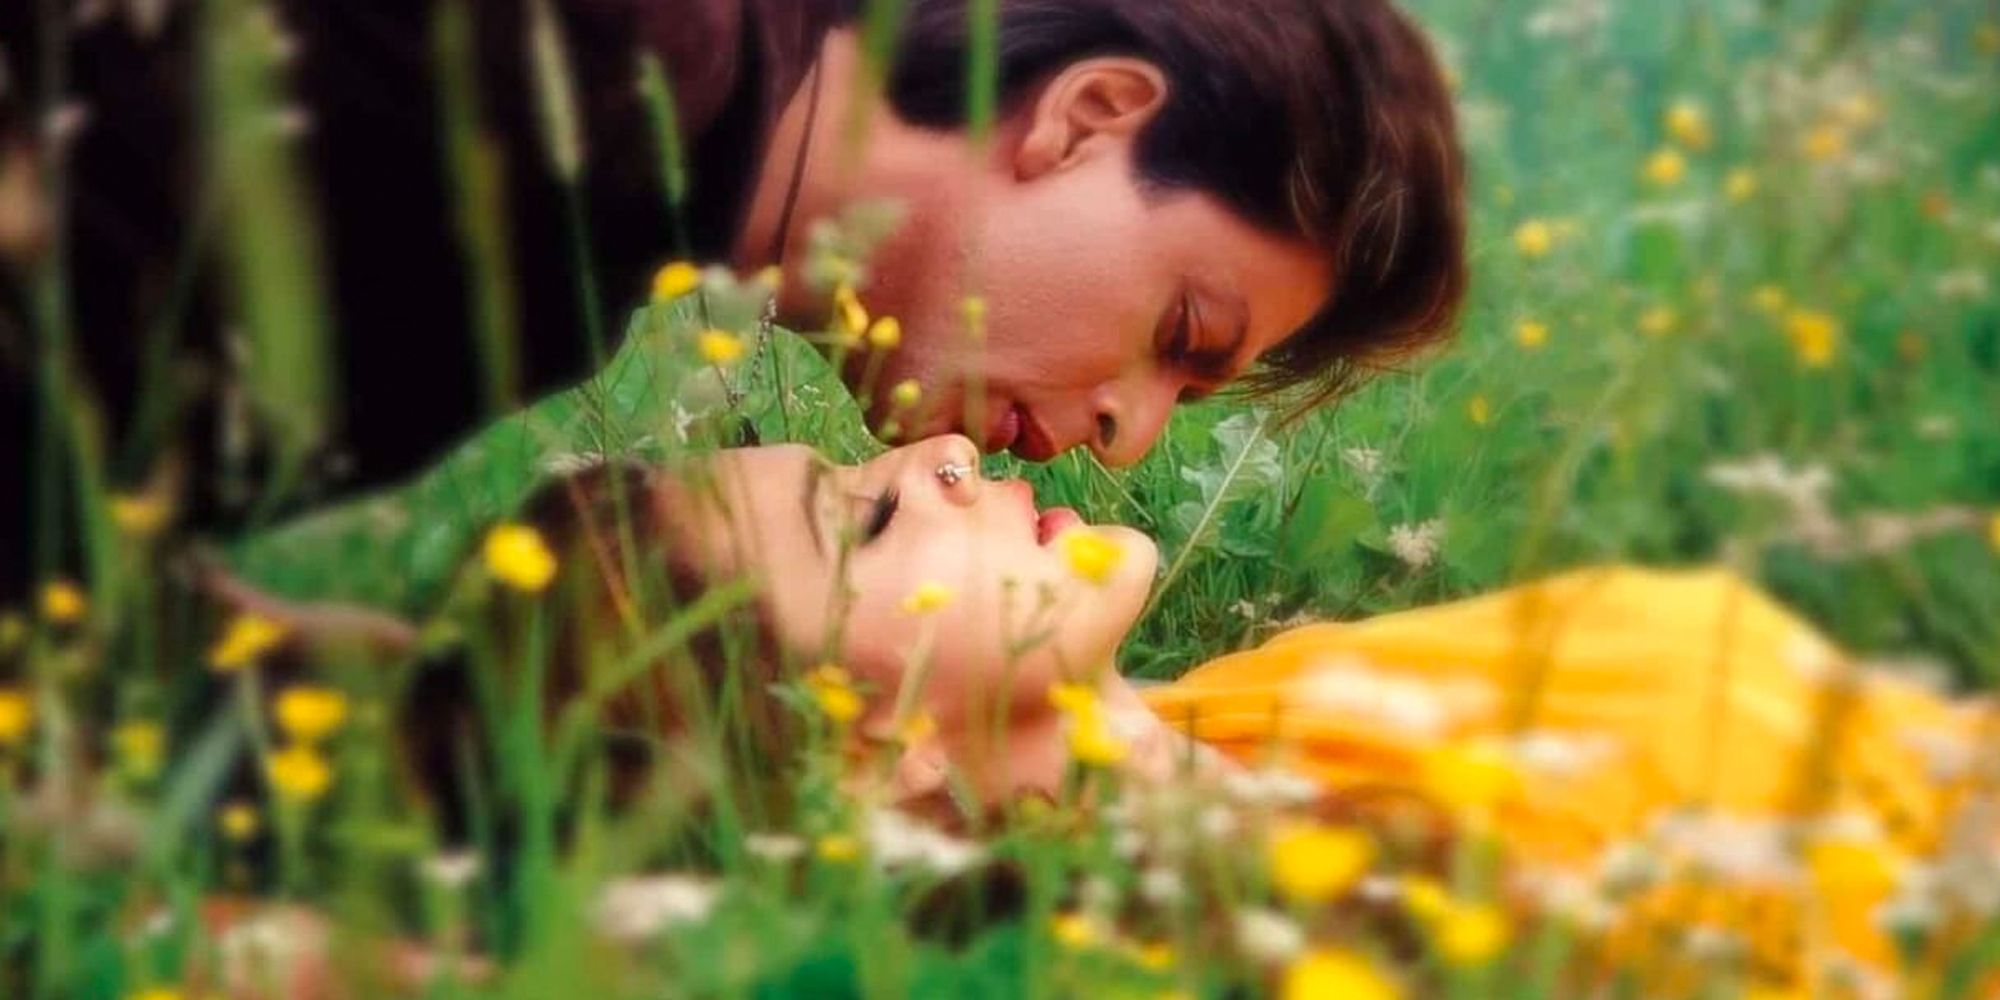 Shah Rukh Khan laying in a field with a girl